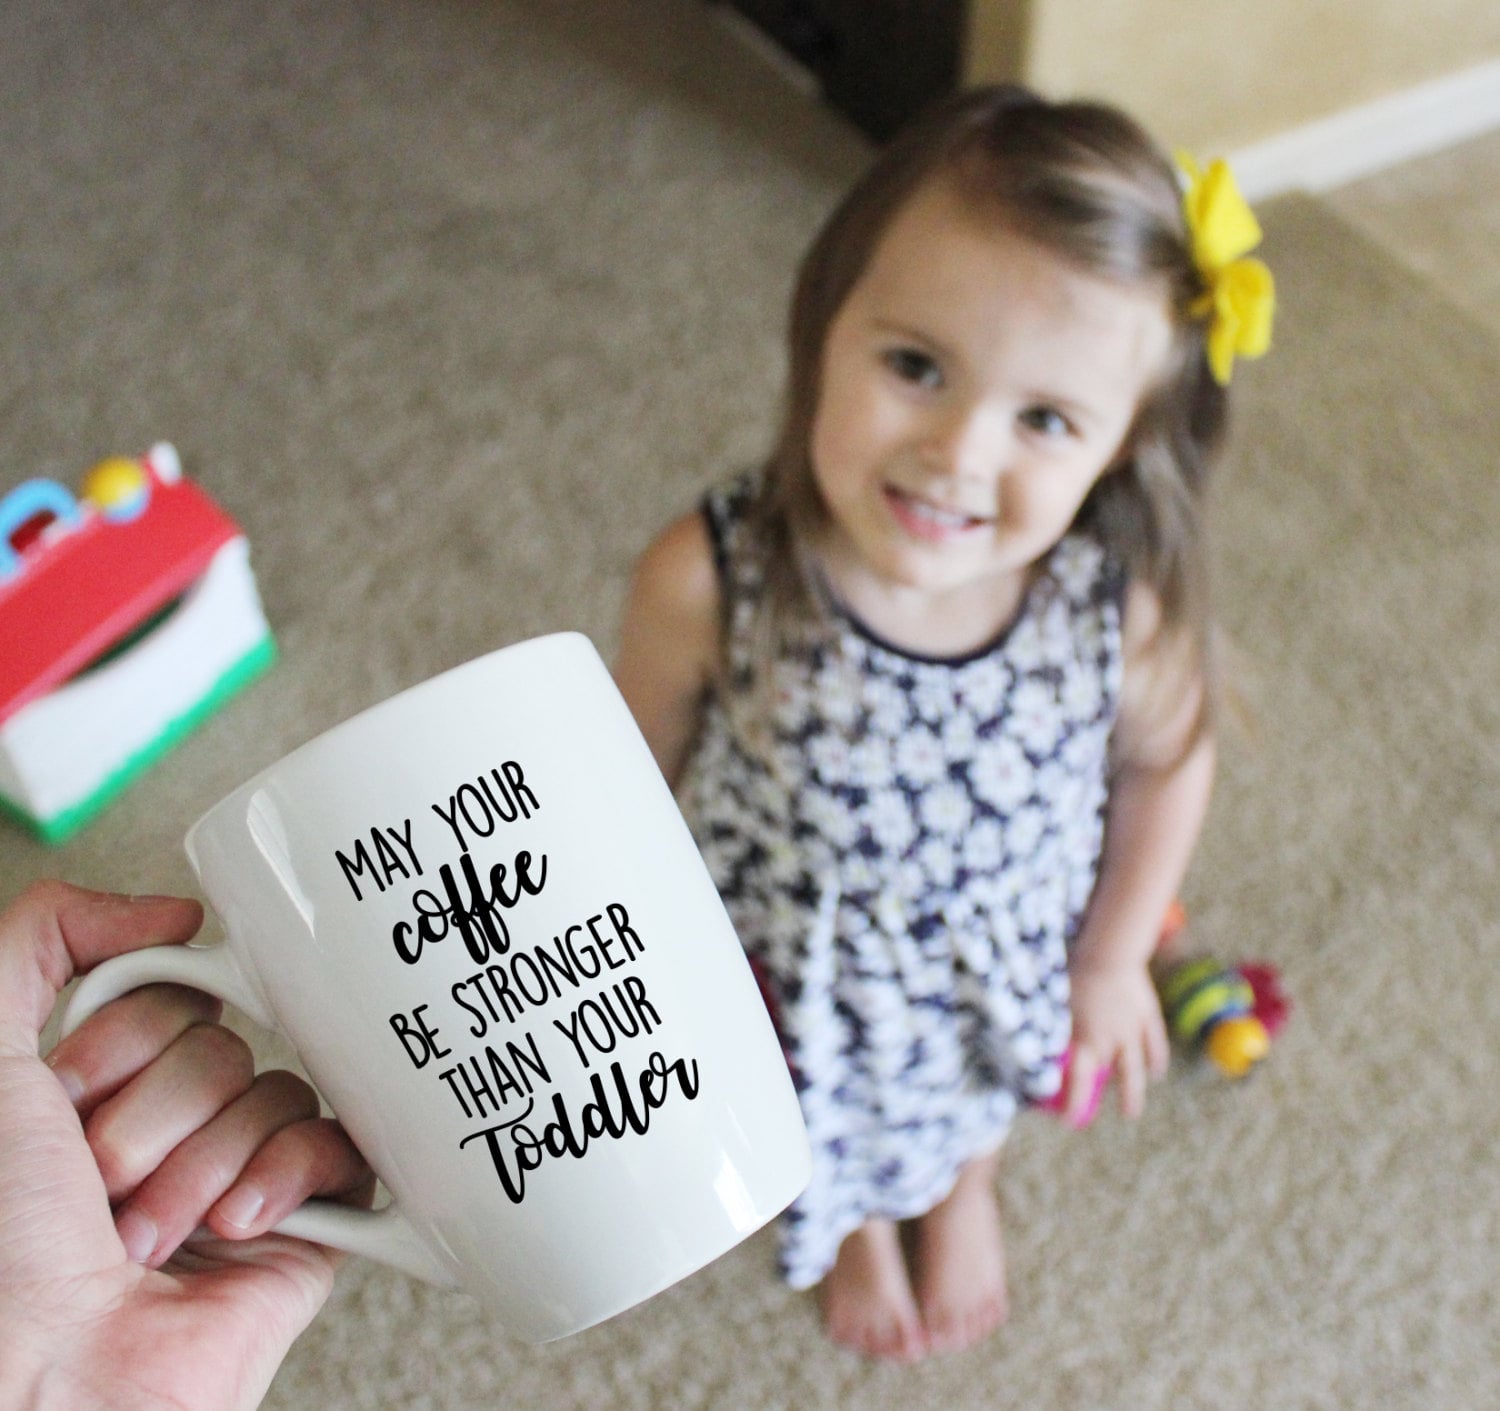 May Your Drink be Stronger than Your Toddler Coffee Mug - Mother